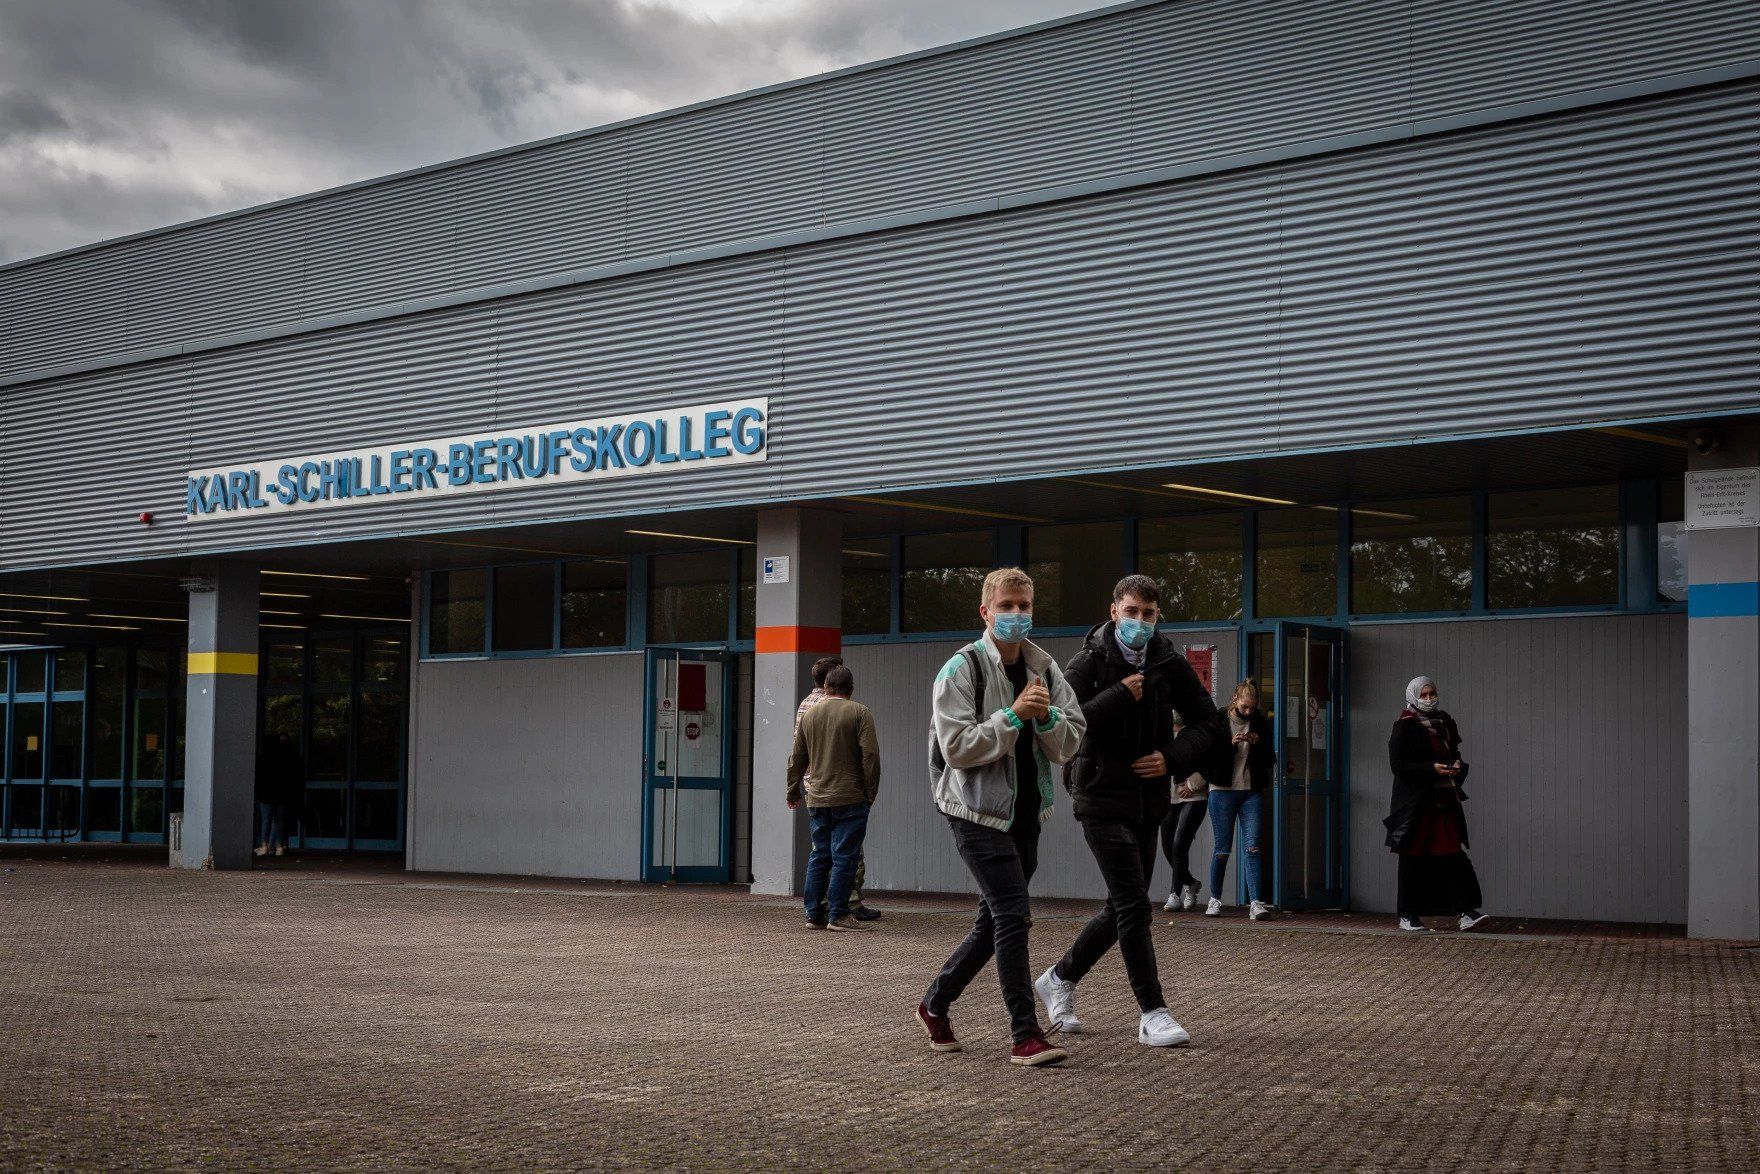 Students leave Karl-Schiller-Berufskolleg in Brühl, a secondary school outside Cologne, Germany. Students are required by the school to wear masks on schools grounds. Image by Ryan Delaney. Germany, 2020.